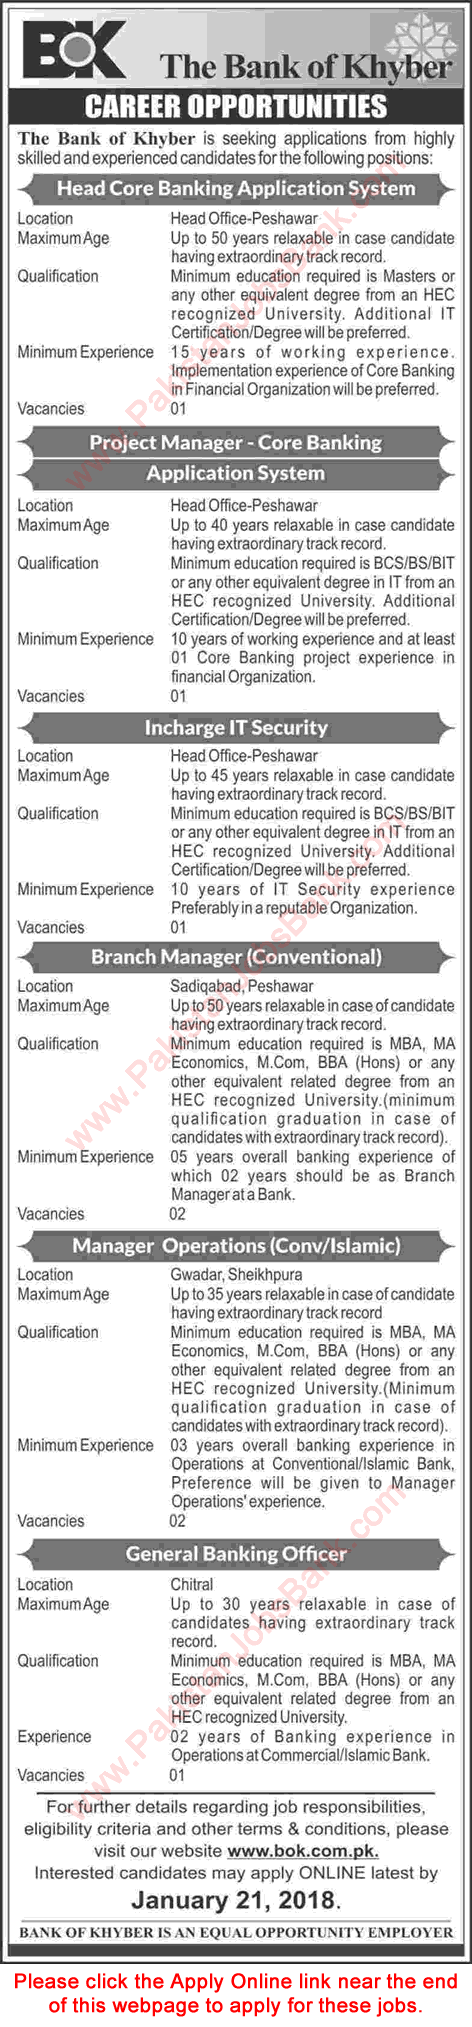 Bank of Khyber Jobs 2018 January Apply Online General Banking Officer, Operations Managers & Others Latest